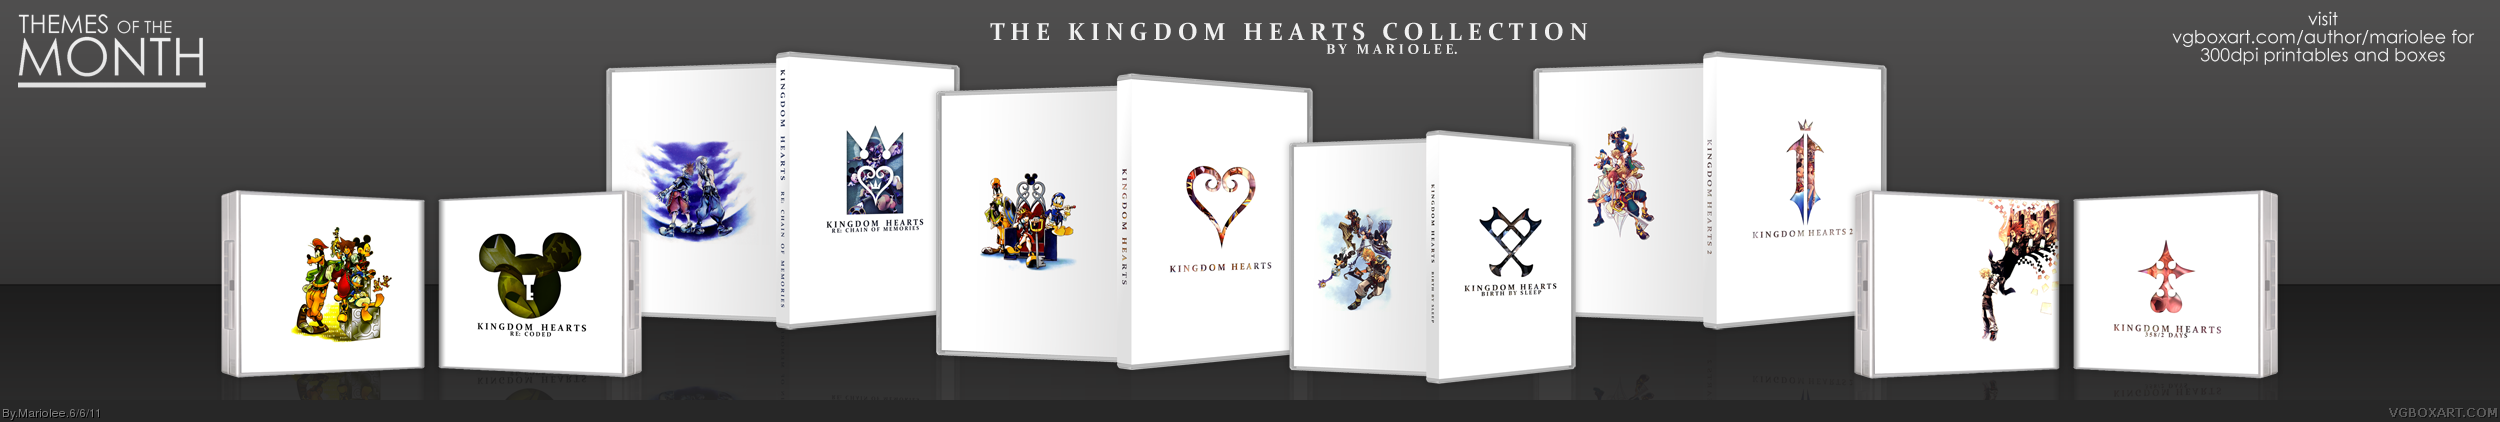 43021-the-kingdom-hearts-collection-full.png